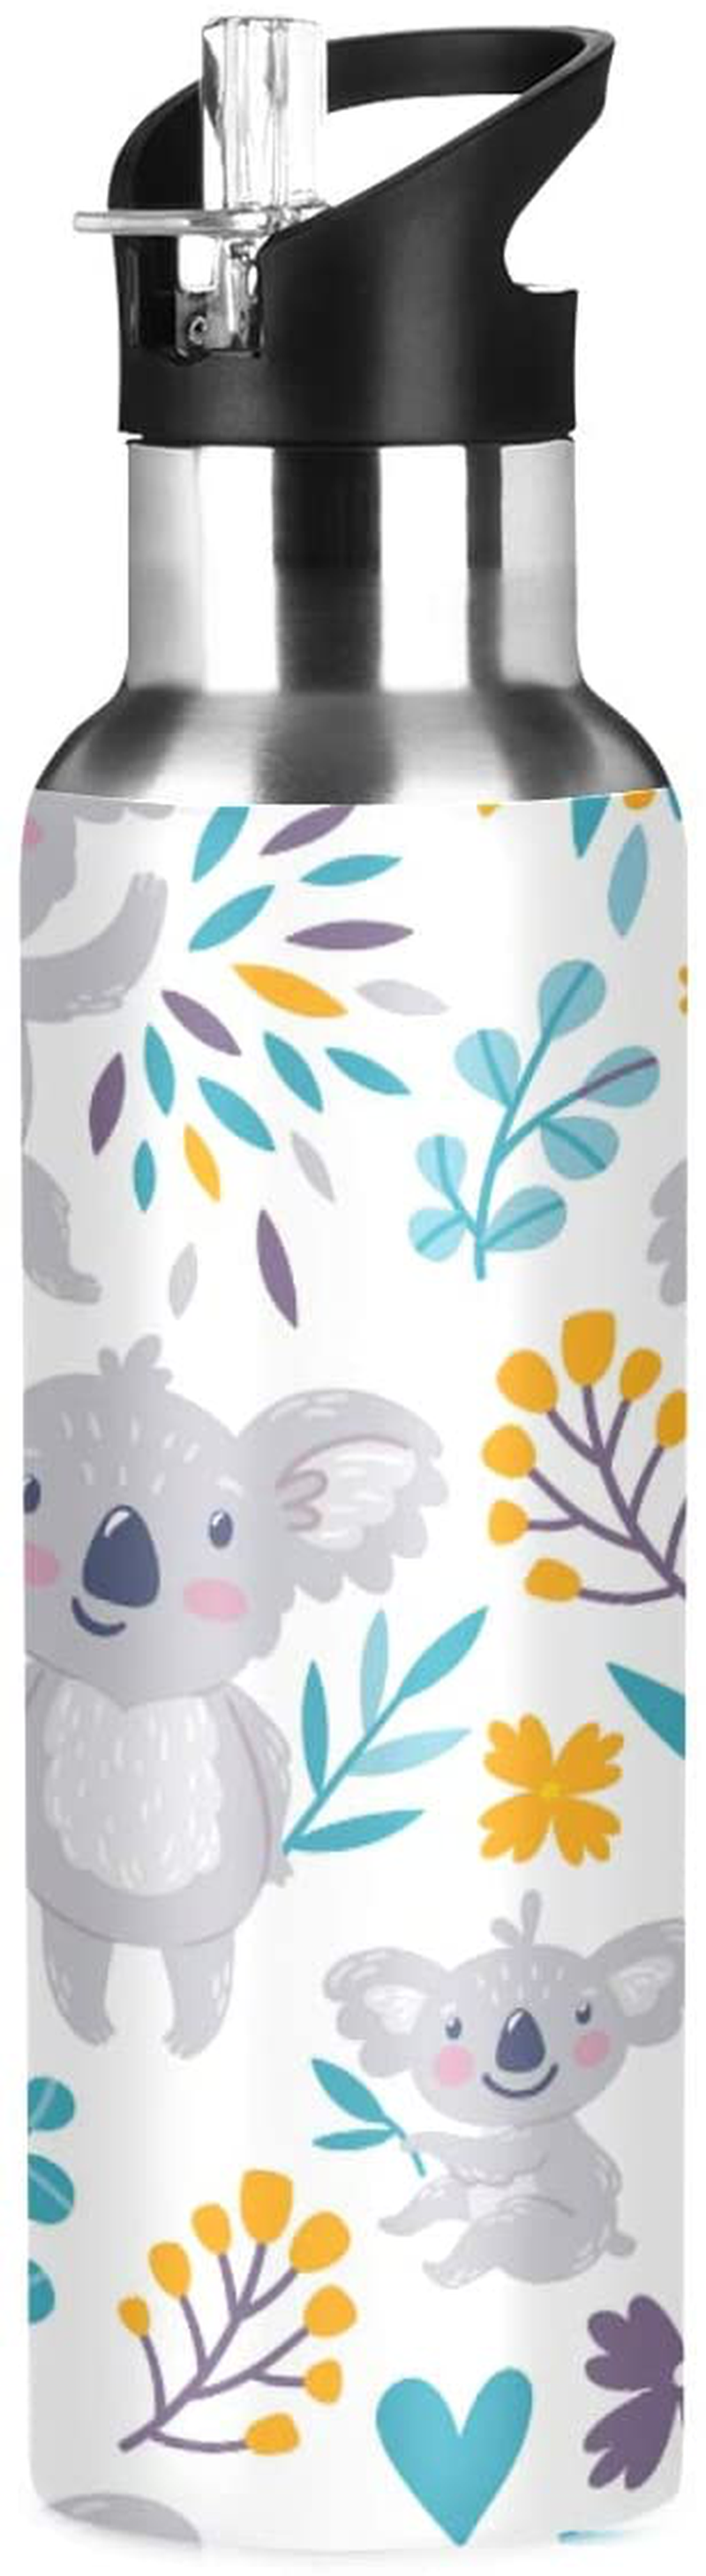 Nander Cute Koala Bears Water Bottle 22oz Double Wall Vacuum Insulated Leak Proof Stainless Steel Sports Water Bottle with Straw and Easy to Carry